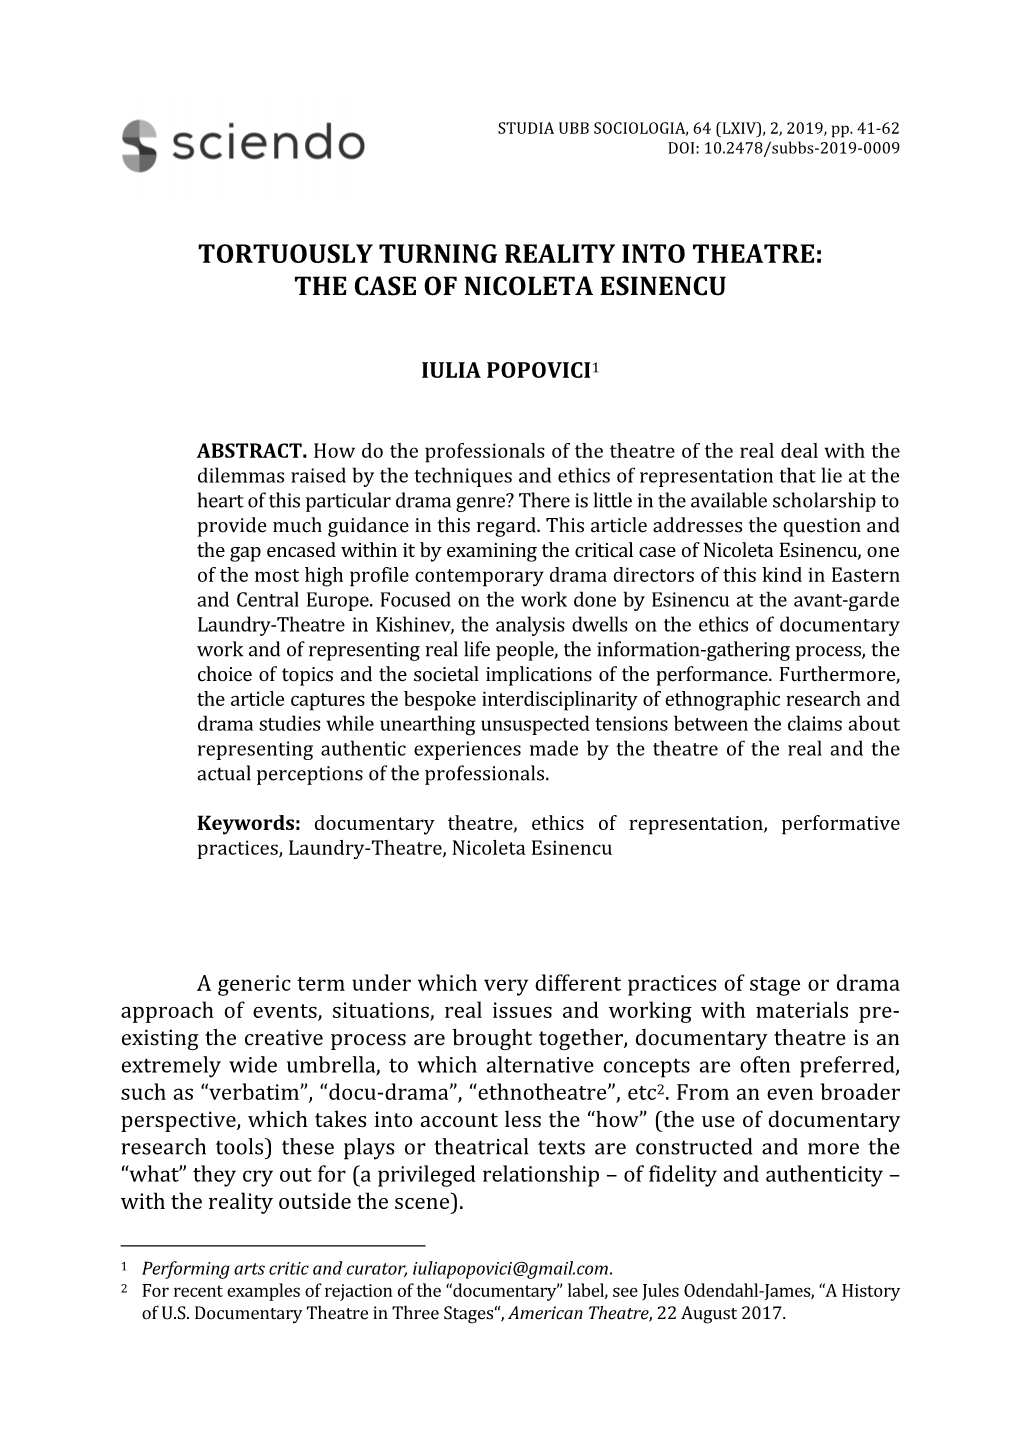 Tortuously Turning Reality Into Theatre: the Case of Nicoleta Esinencu